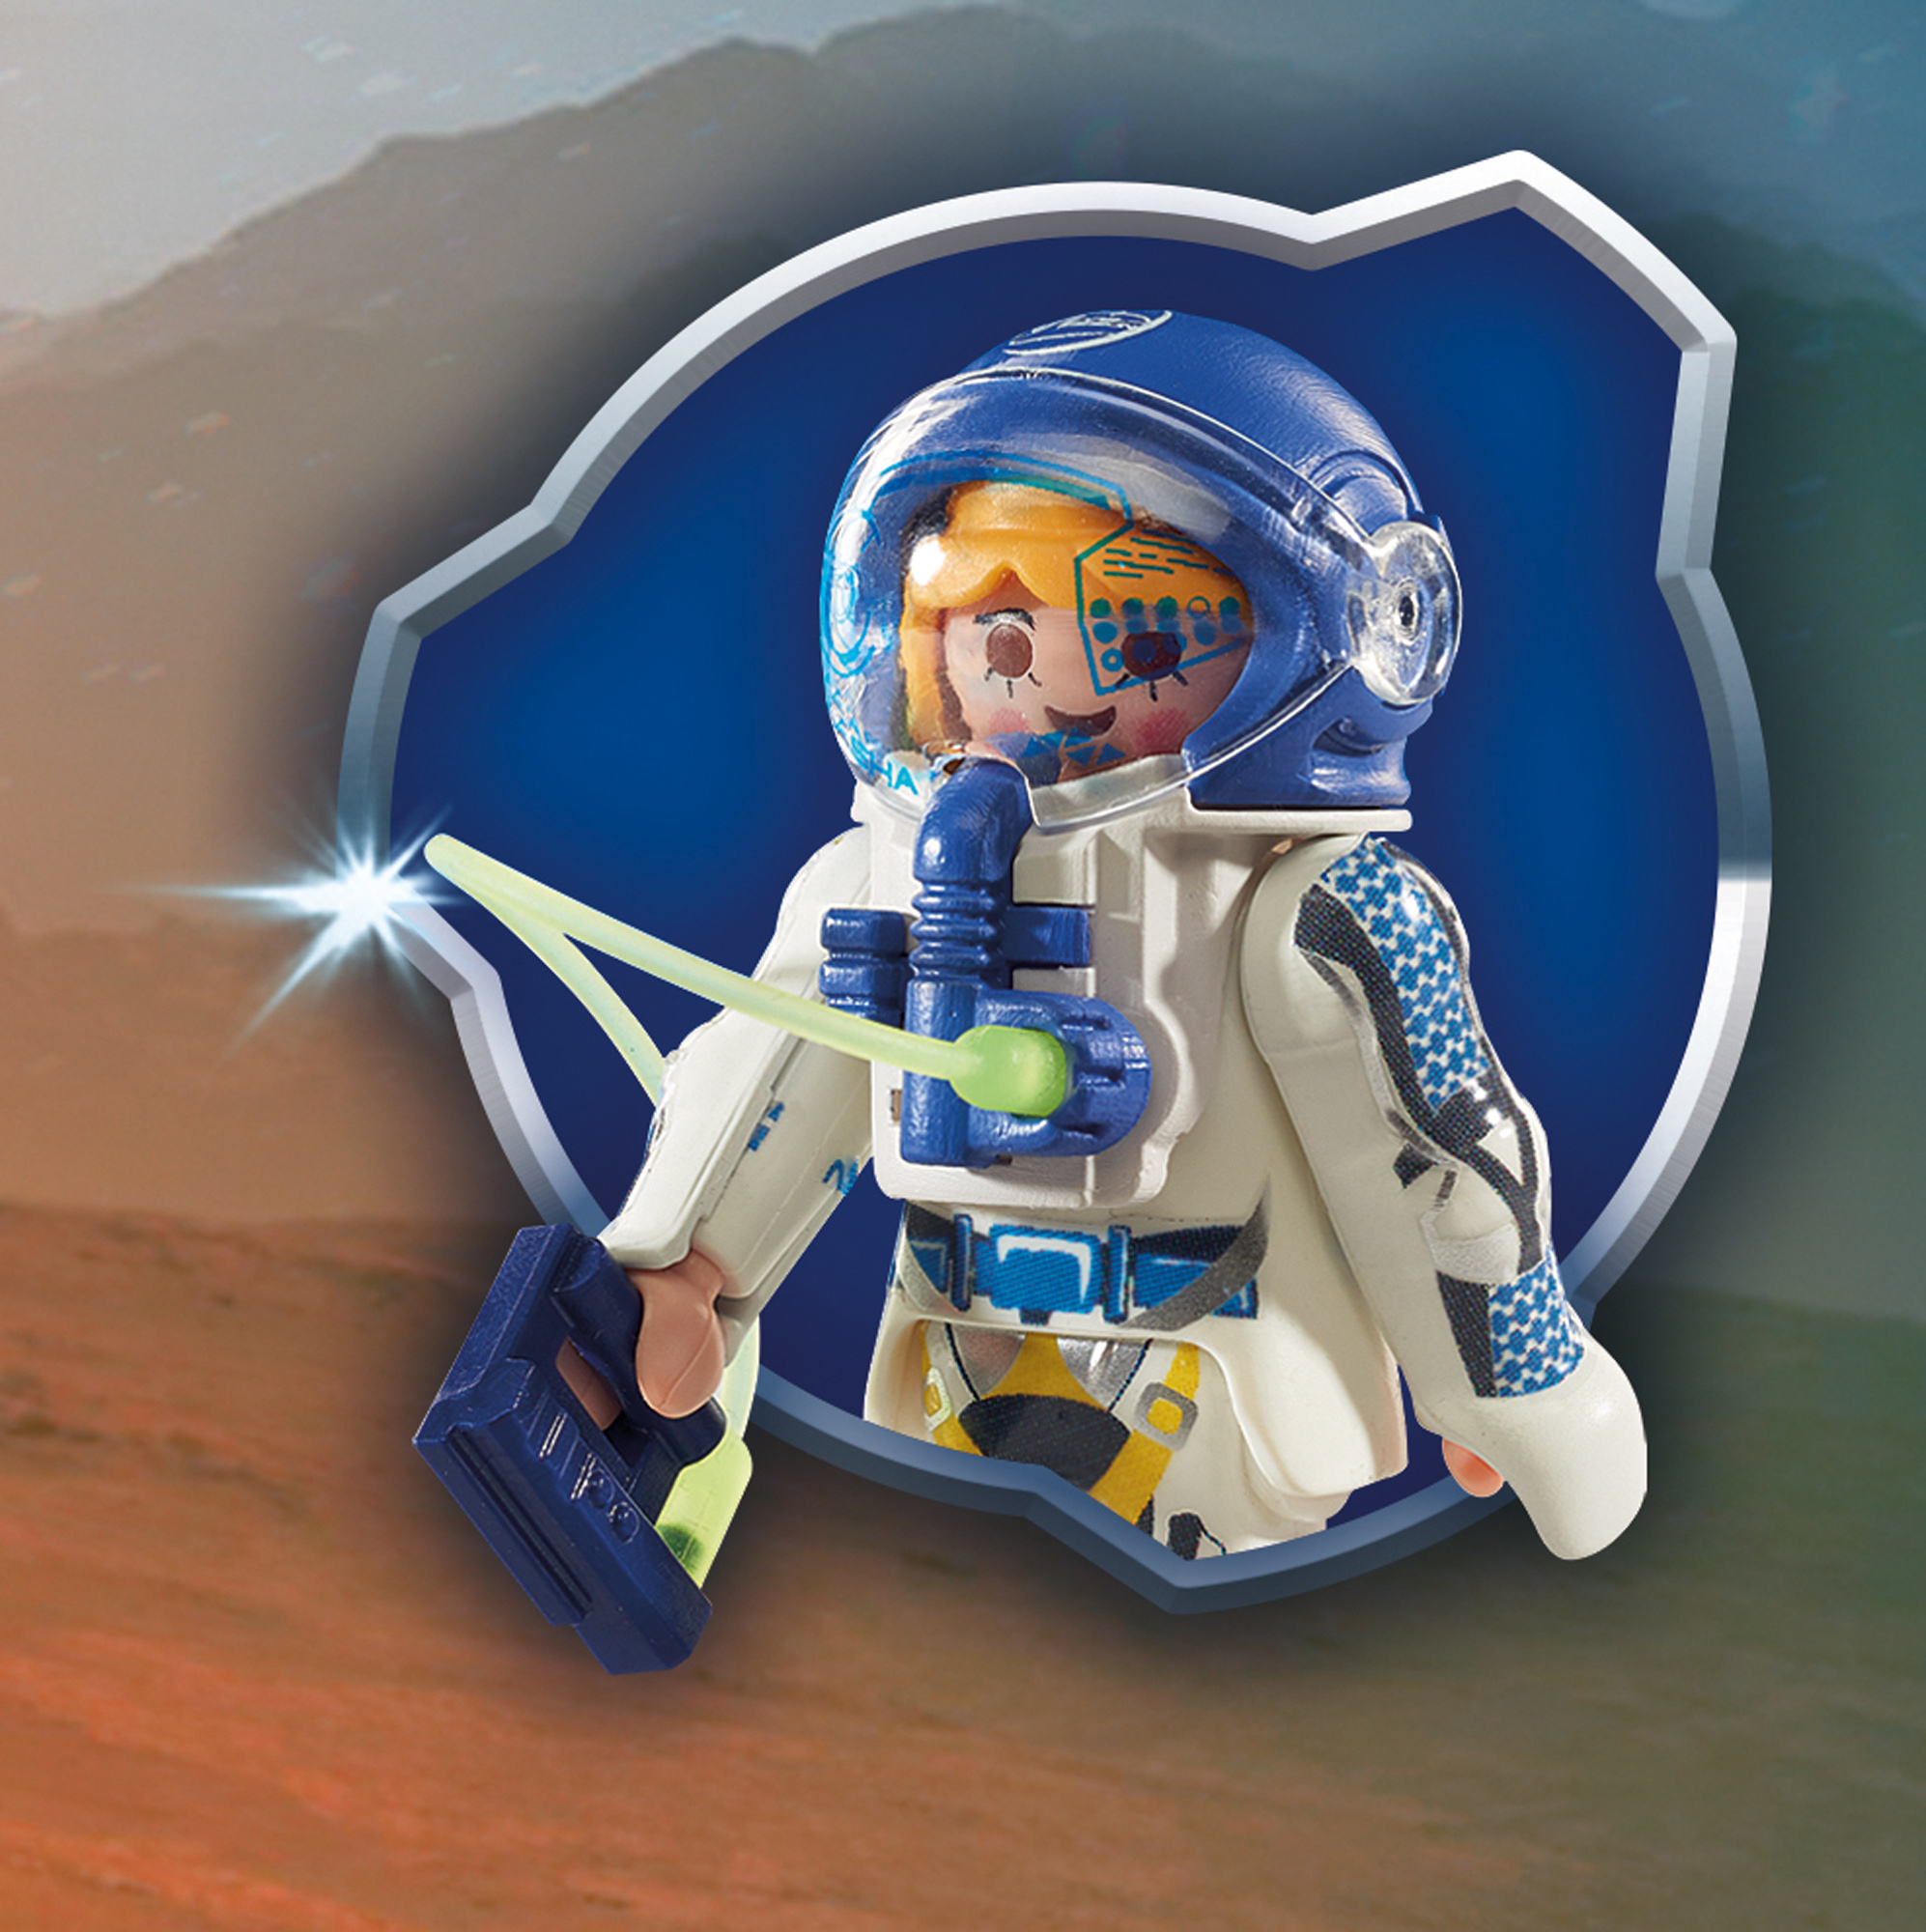 PLAYMOBIL Mars Space Station - image 5 of 9